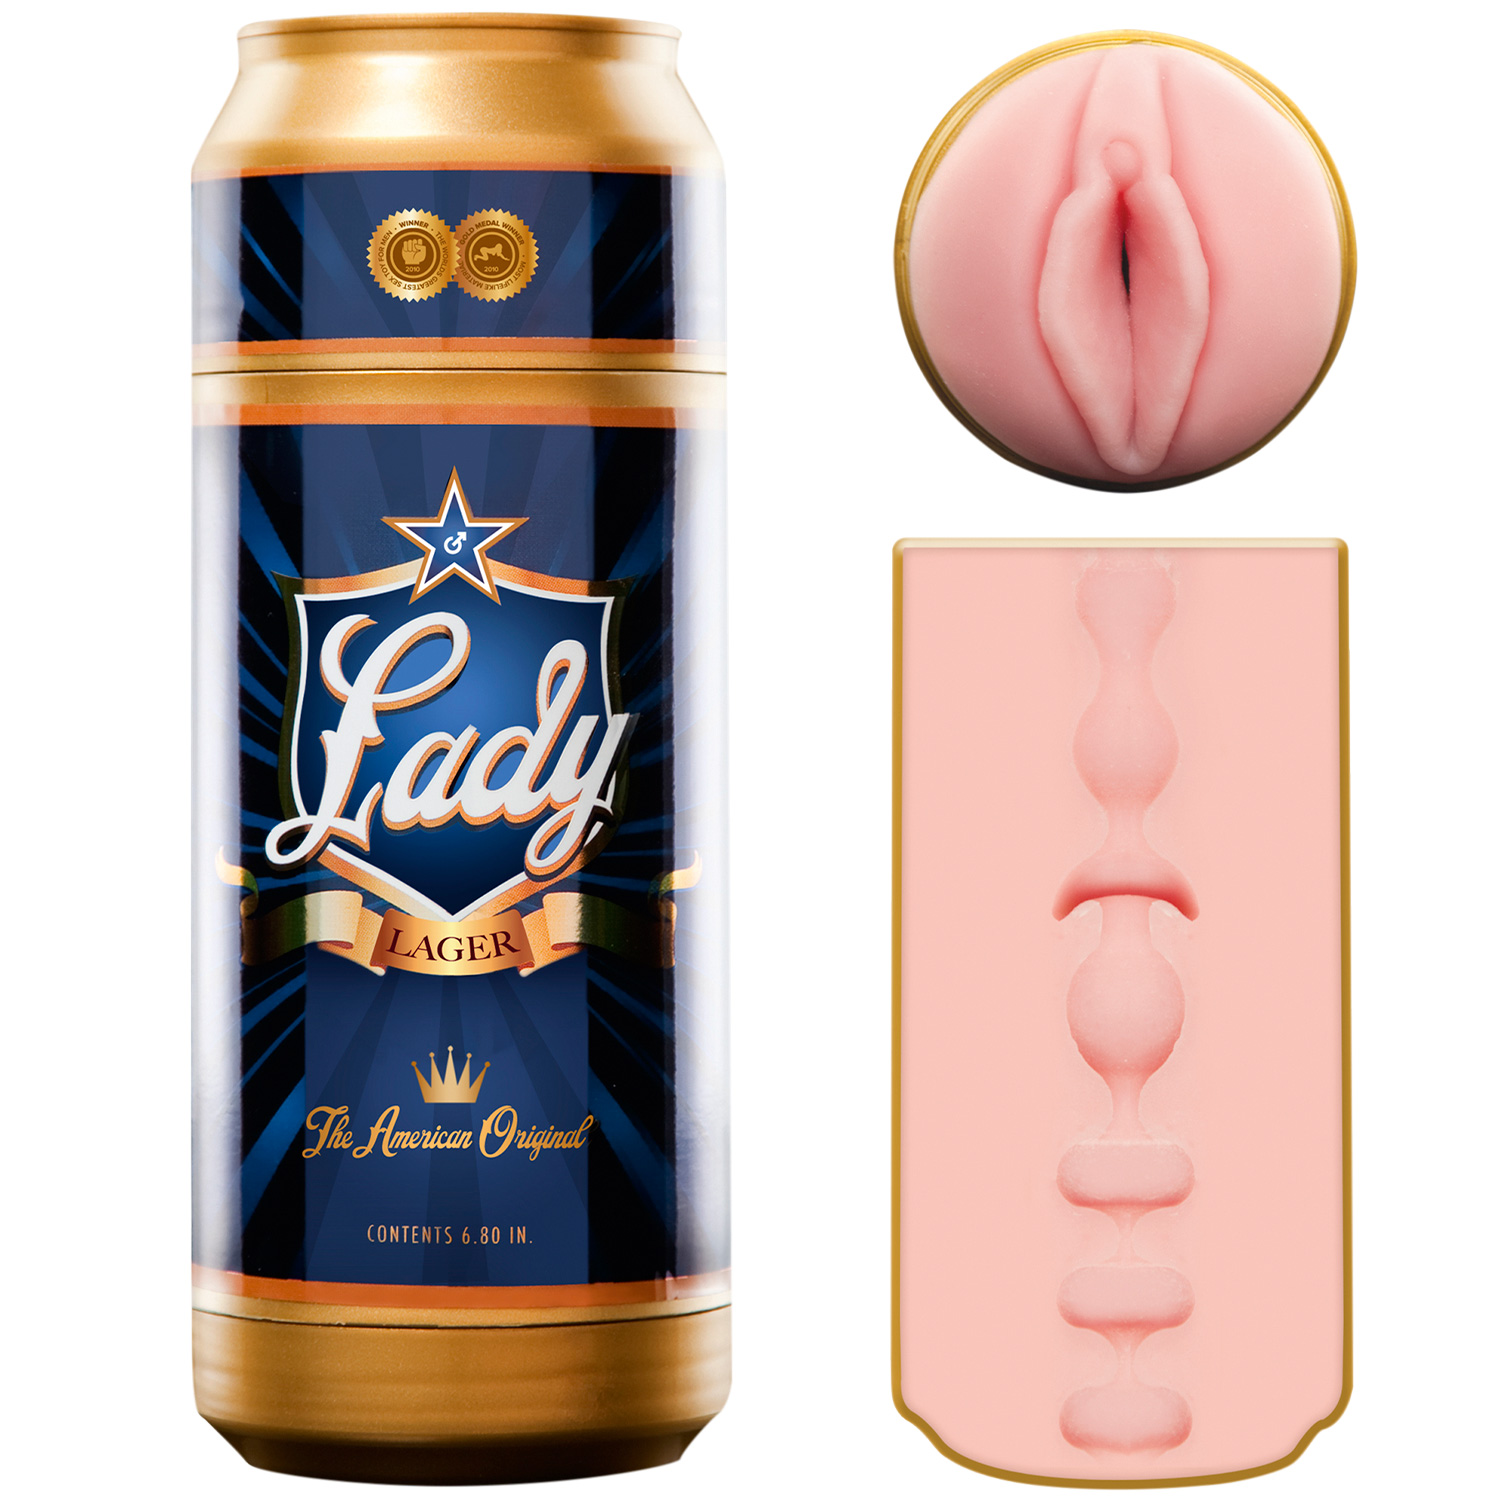 Fleshlight Sex in a Can Lady Lager - Fleshlight